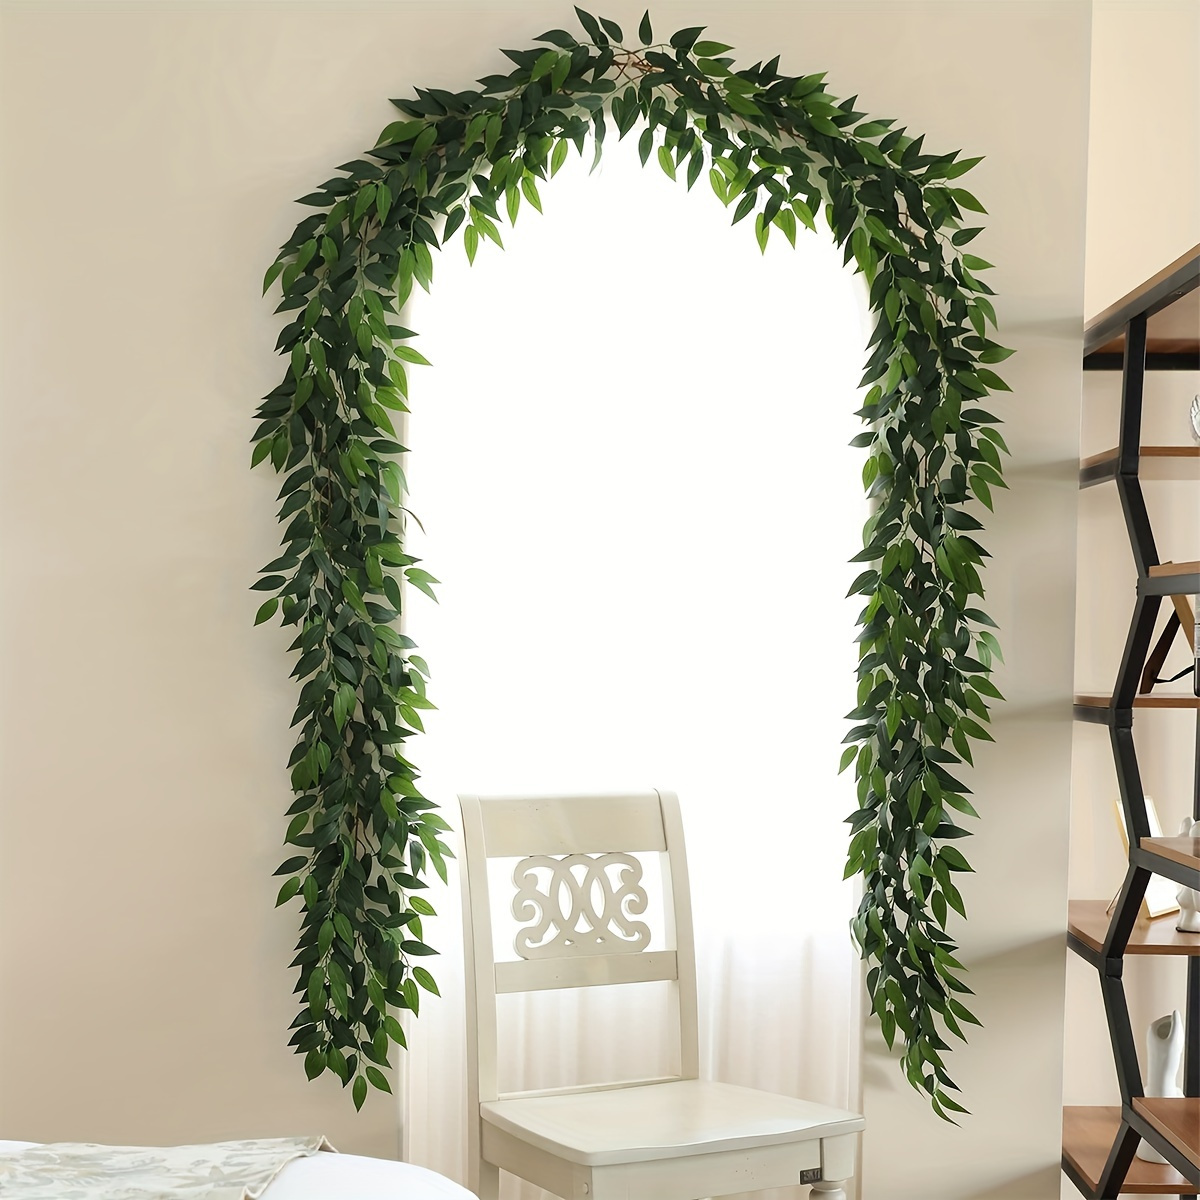 

1pc, Italian Ruscus Artificial Vines, 73" Silk Vine Garland With Green Leaves, Fake Hanging Plants Greenery Decor, Home Decor, Bedroom Decor, Wall Decor, Party Decor, Wedding Decoration